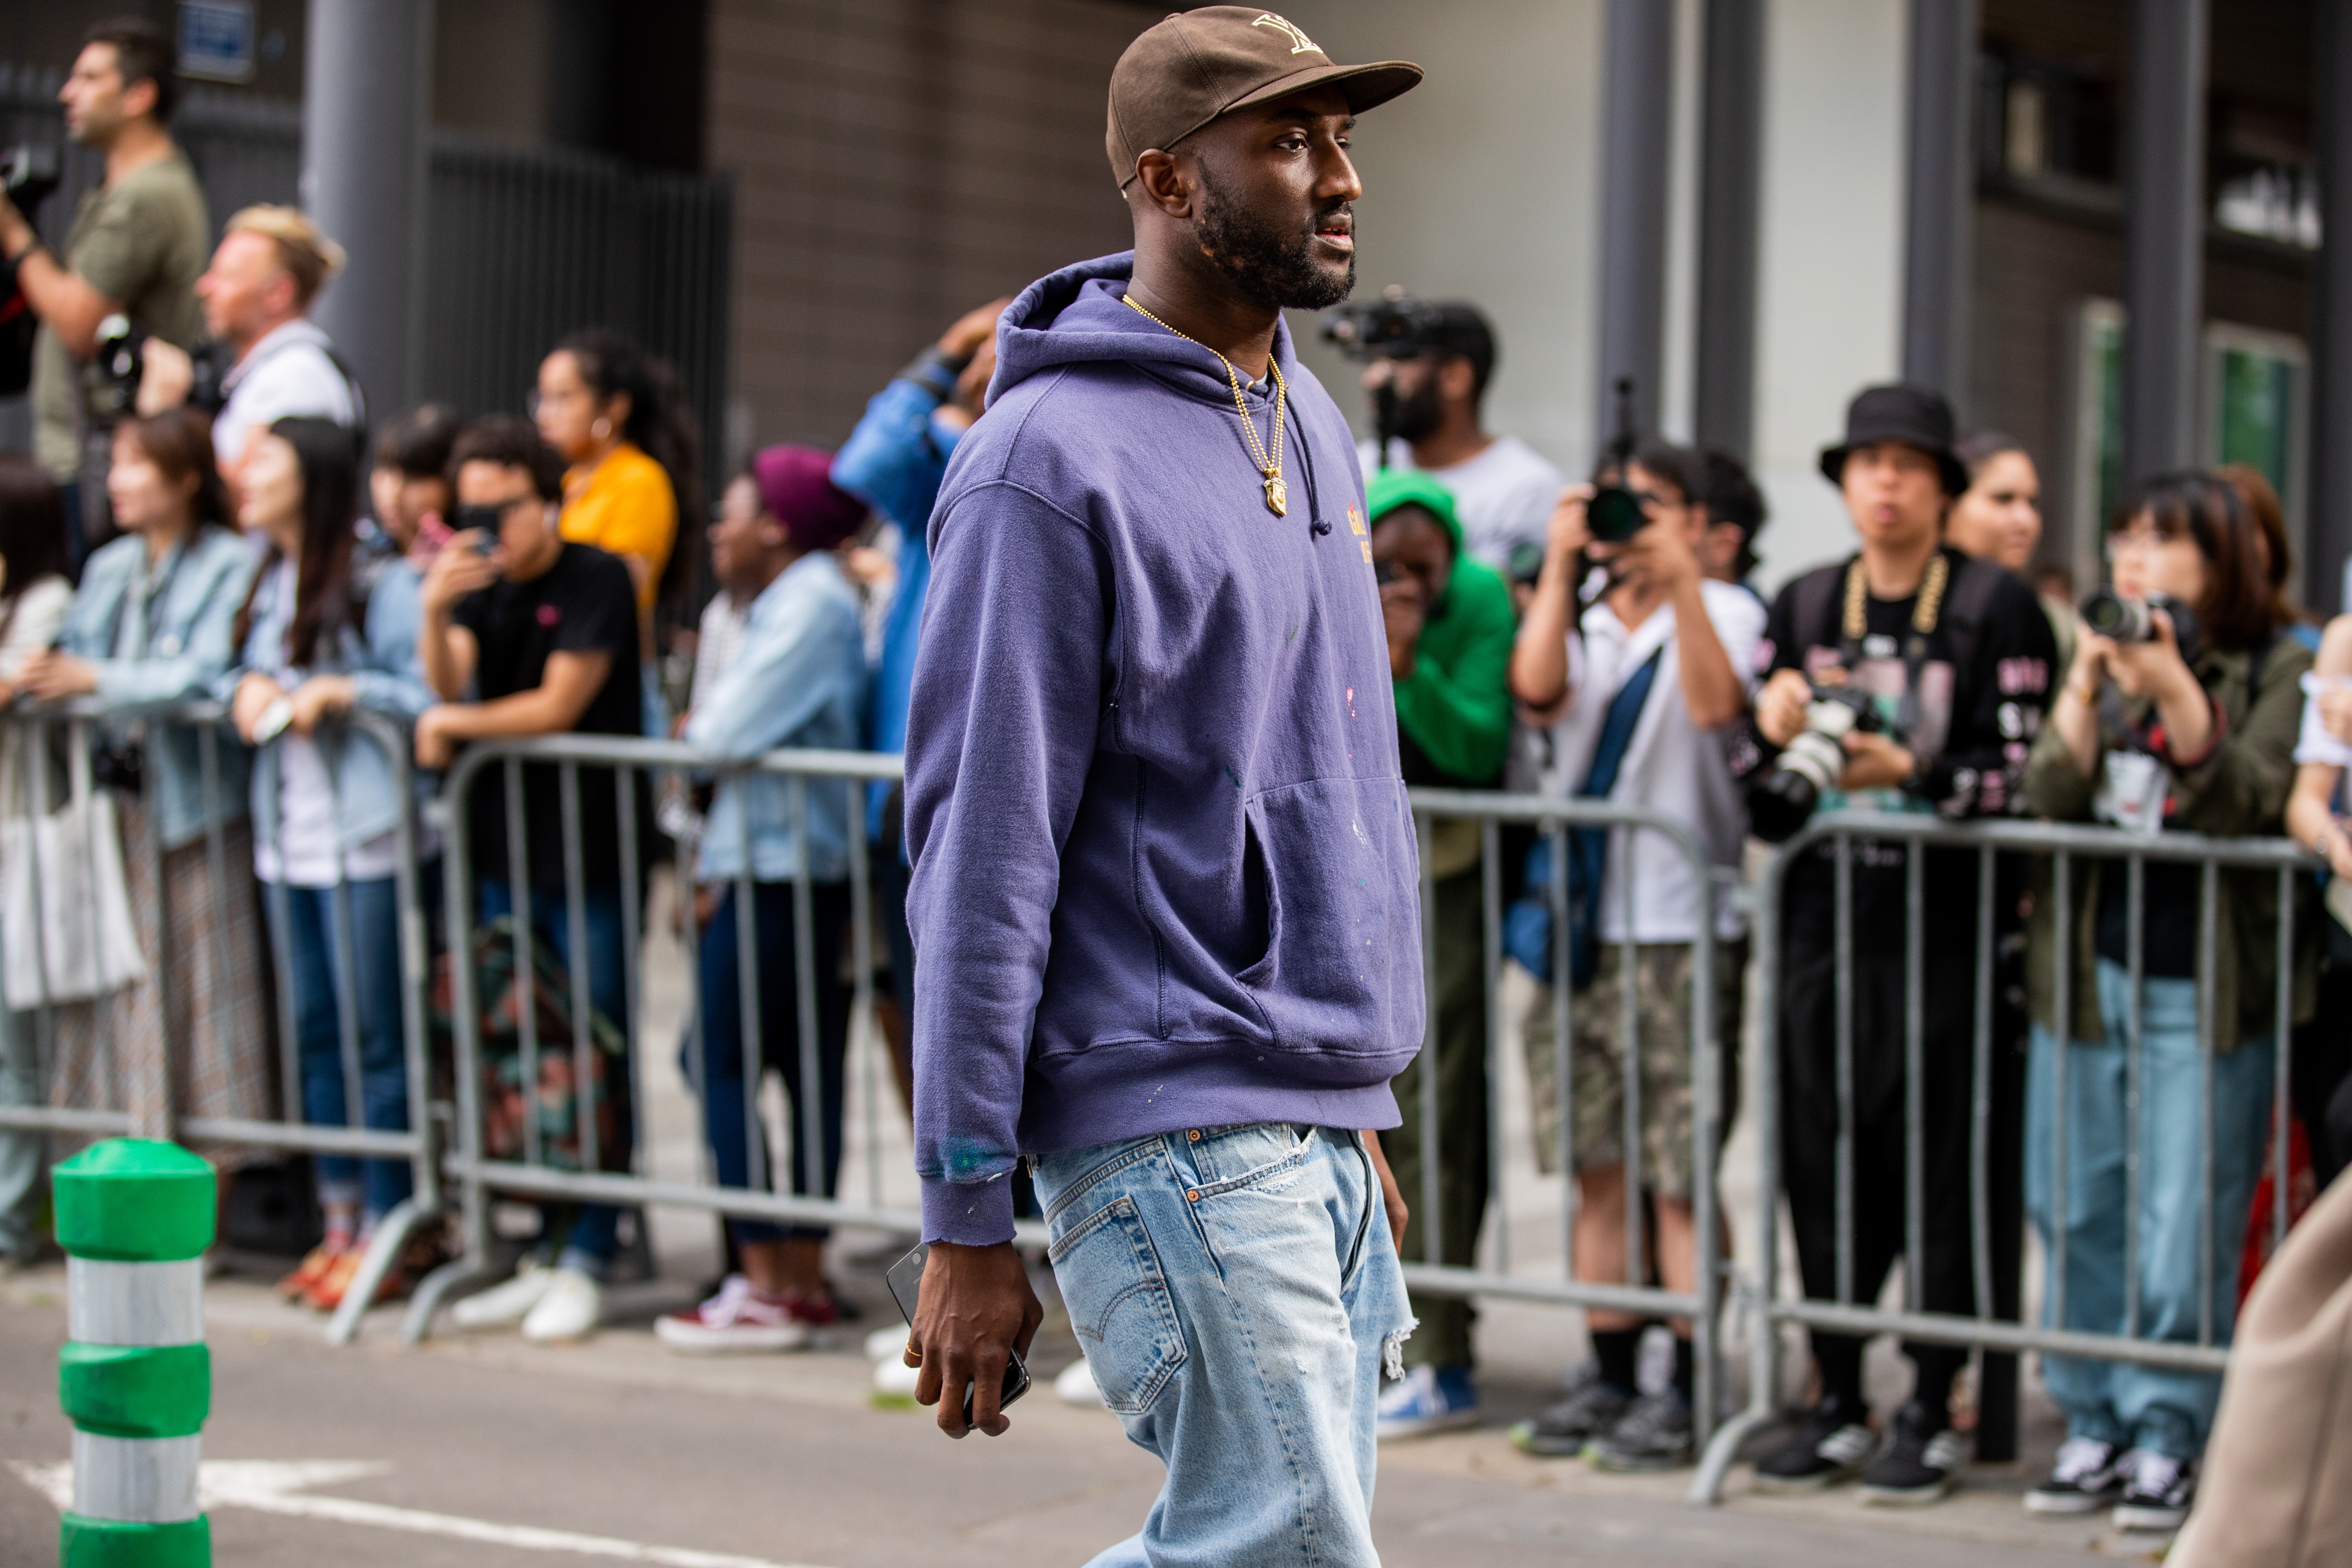 Virgil Abloh Gives His Hip Take on IKEA's Famous Bag and Promises More